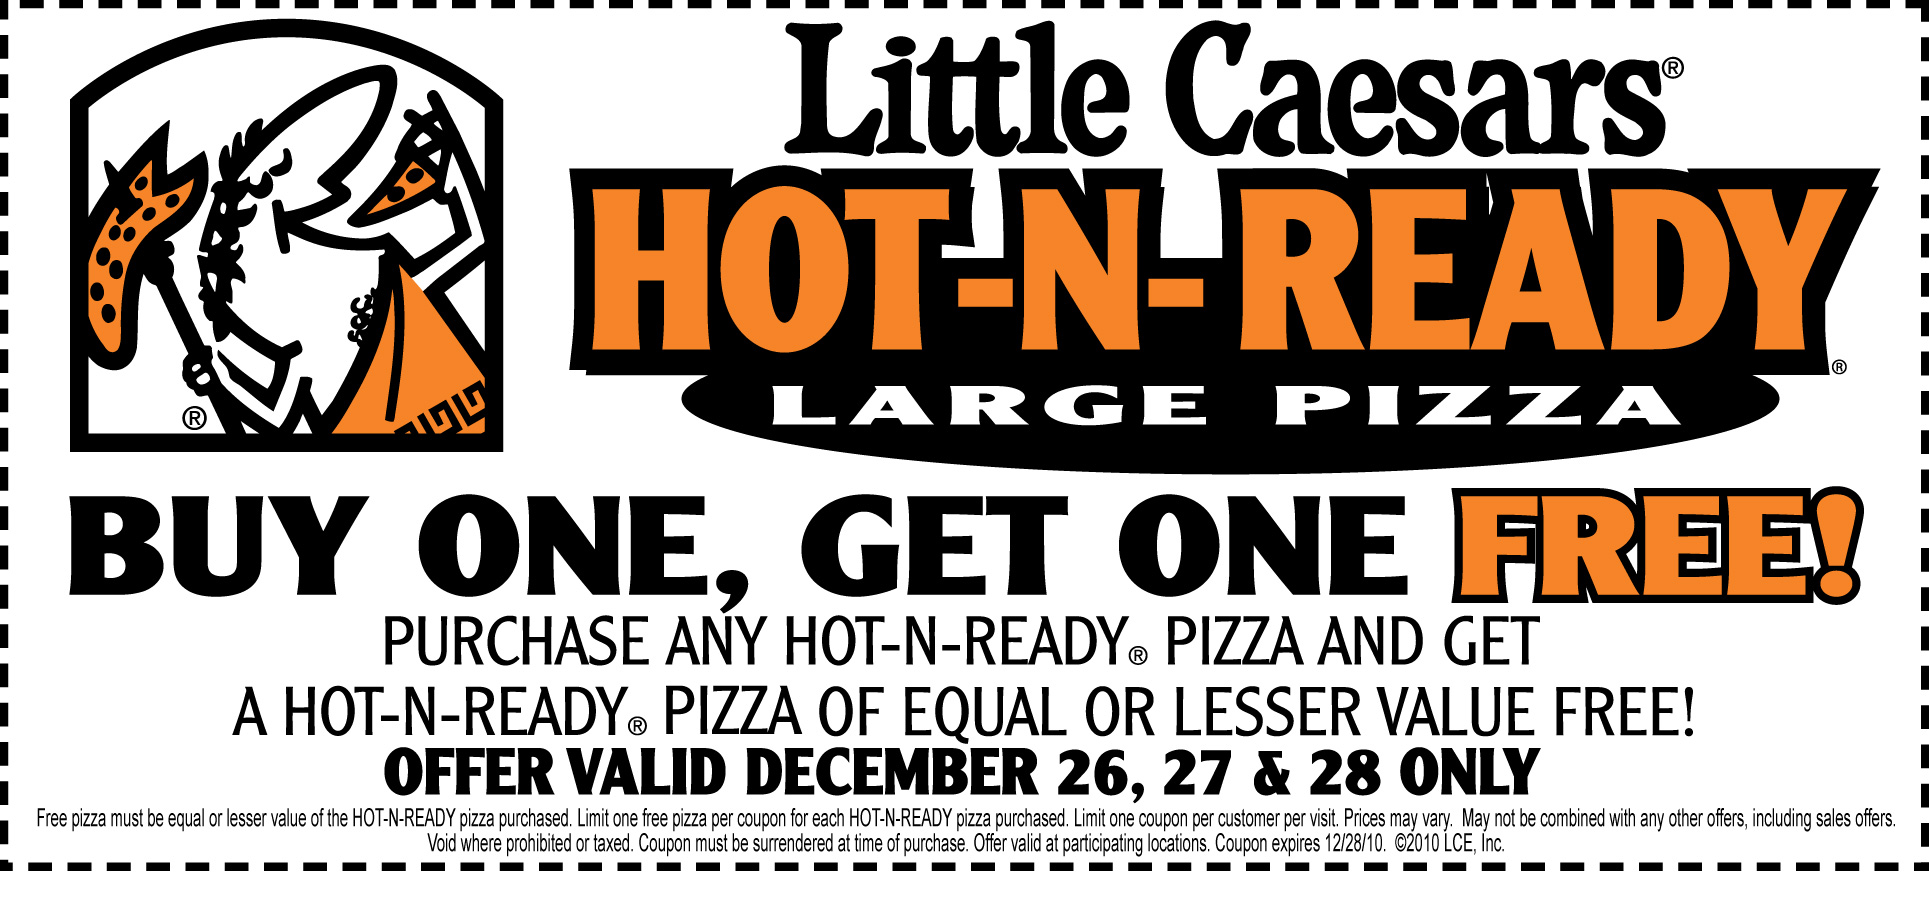 Little Caesars: Buy One Get One Free Coupon - Common Sense With Money